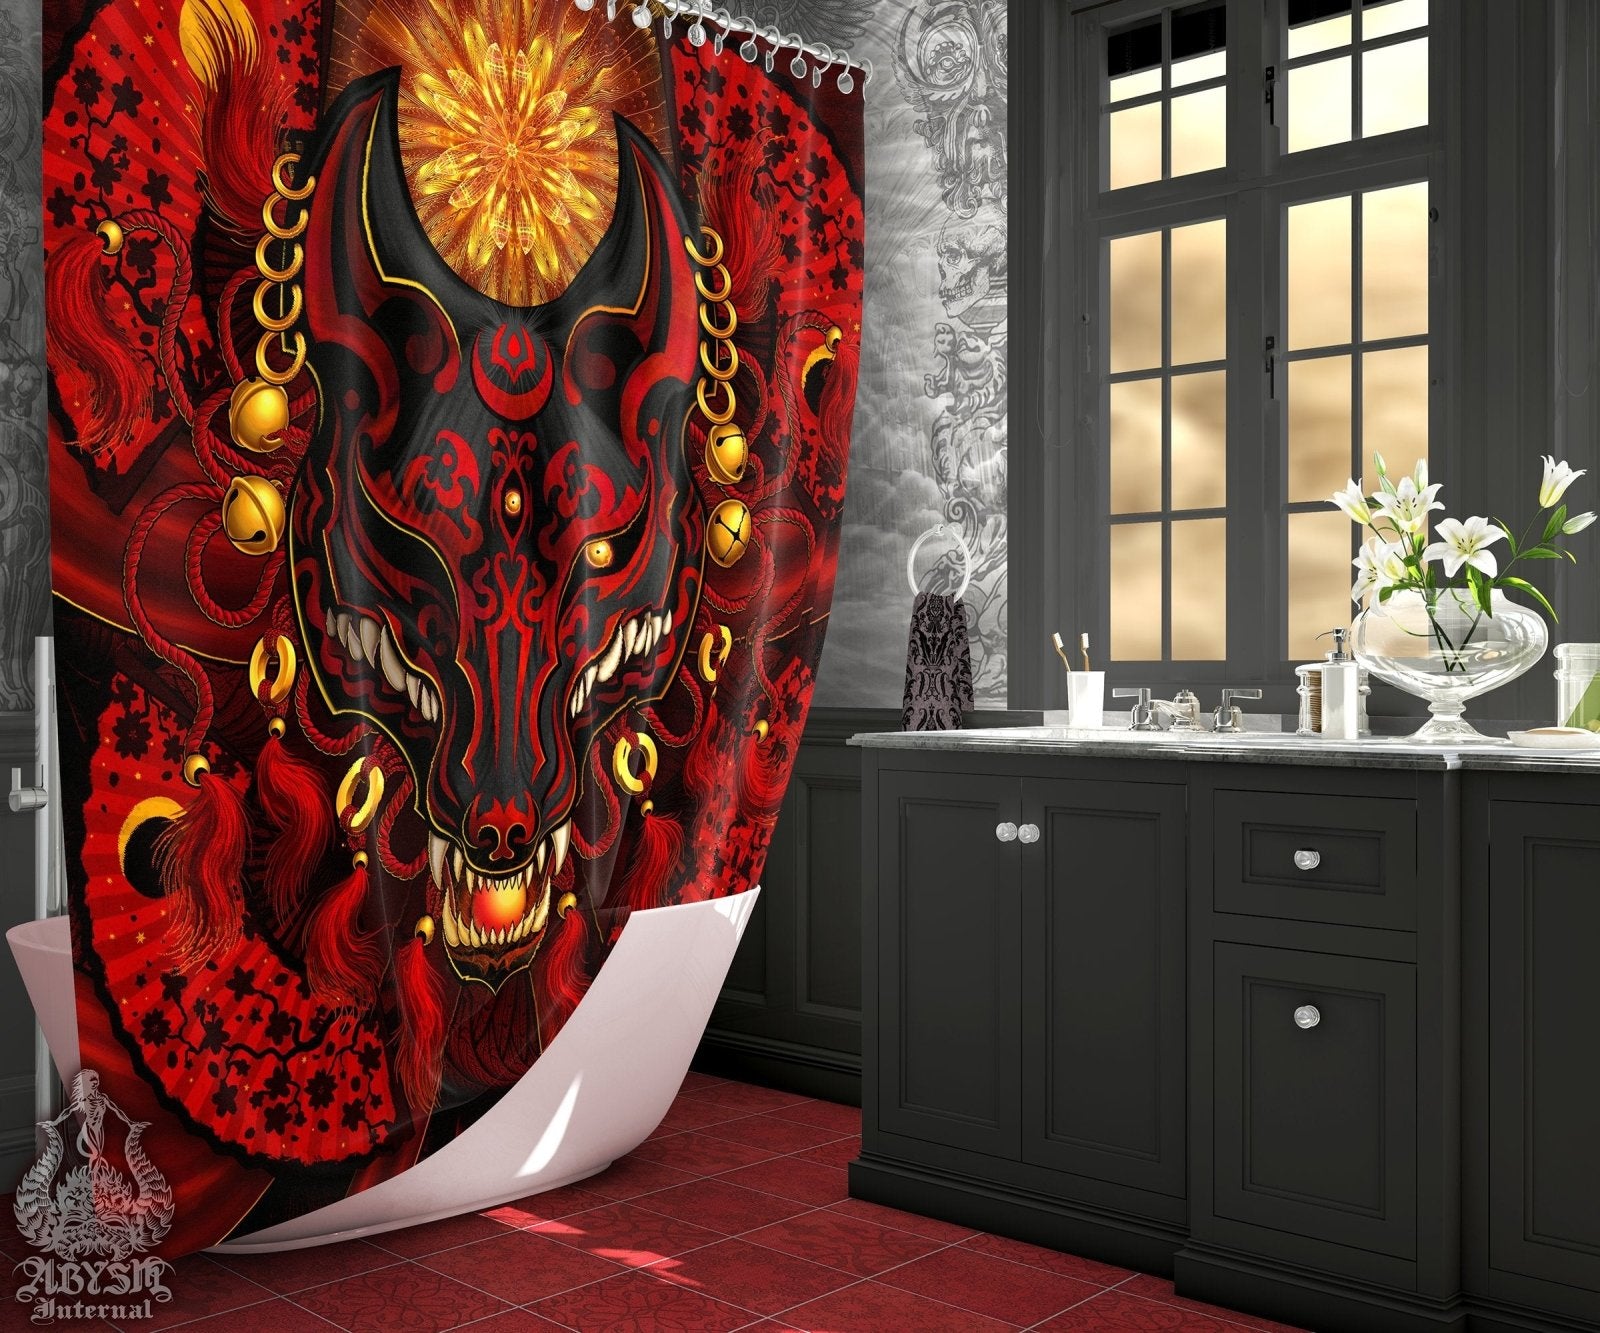 Anime Curtain, Kitsune Mask, Okami, Japanese Fox, Gamer Bathroom Decor, Eclectic and Funky Home - Red & Black - Abysm Internal